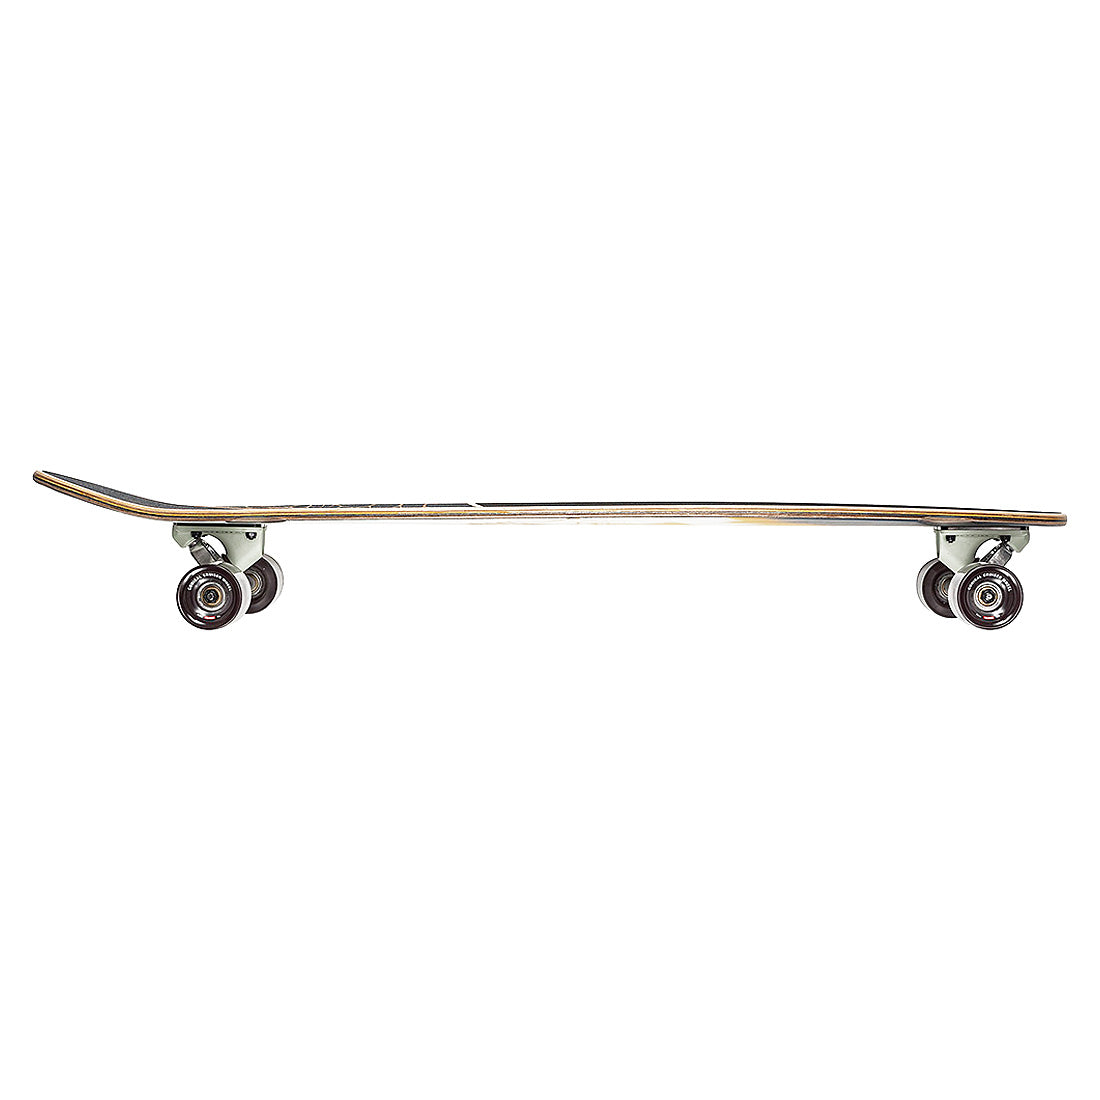 Globe Pinner Classic 40 Complete - Gold Vein Skateboard Completes Longboards